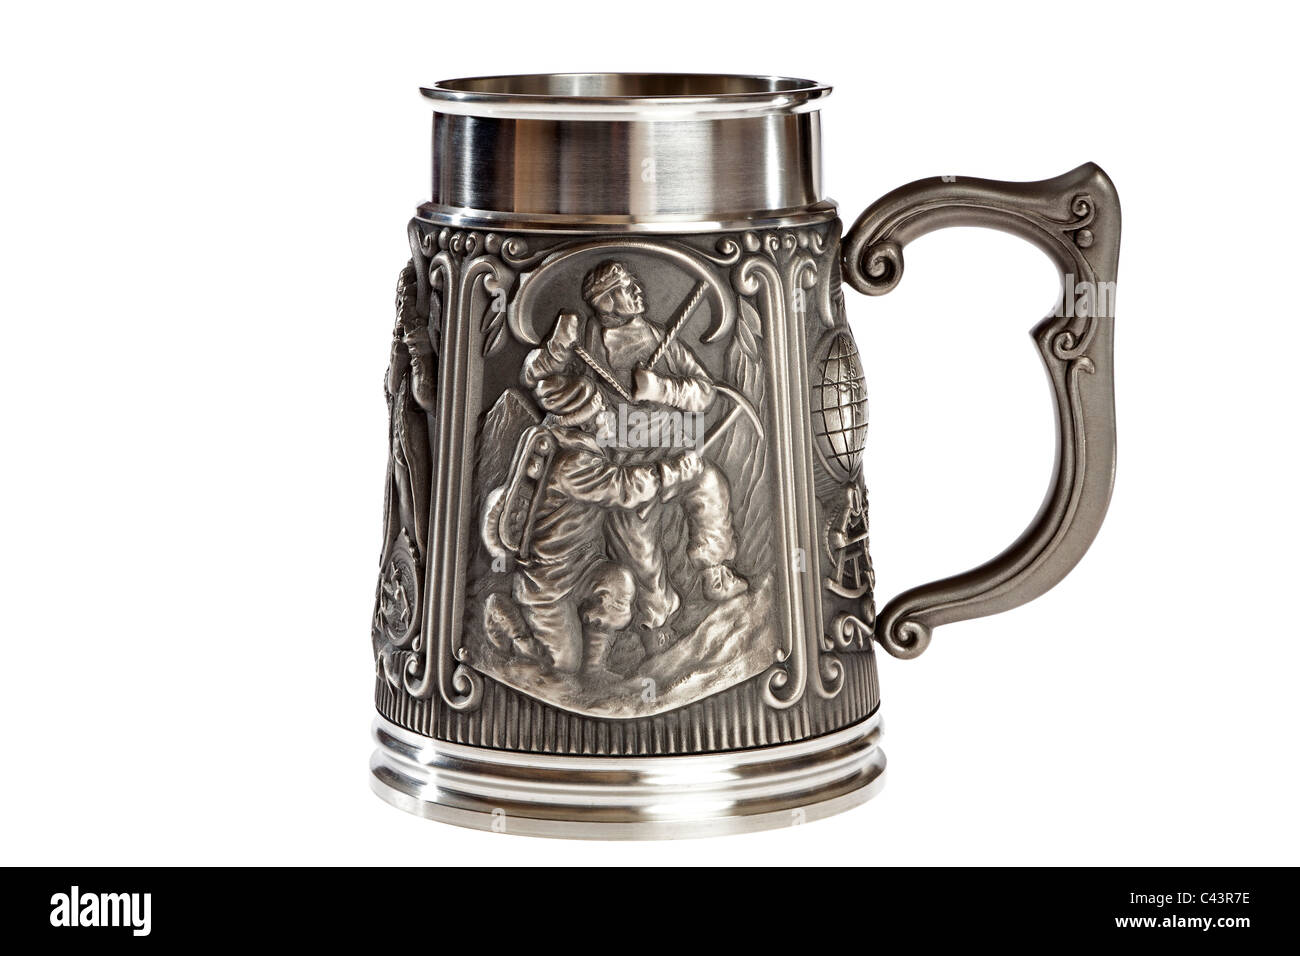 Edmund Hillary and Sherpa Tenzing Norgay portrayed Royal Geographical Society sesquicentennial pewter tankard 1830-1980 JMH4958 Stock Photo